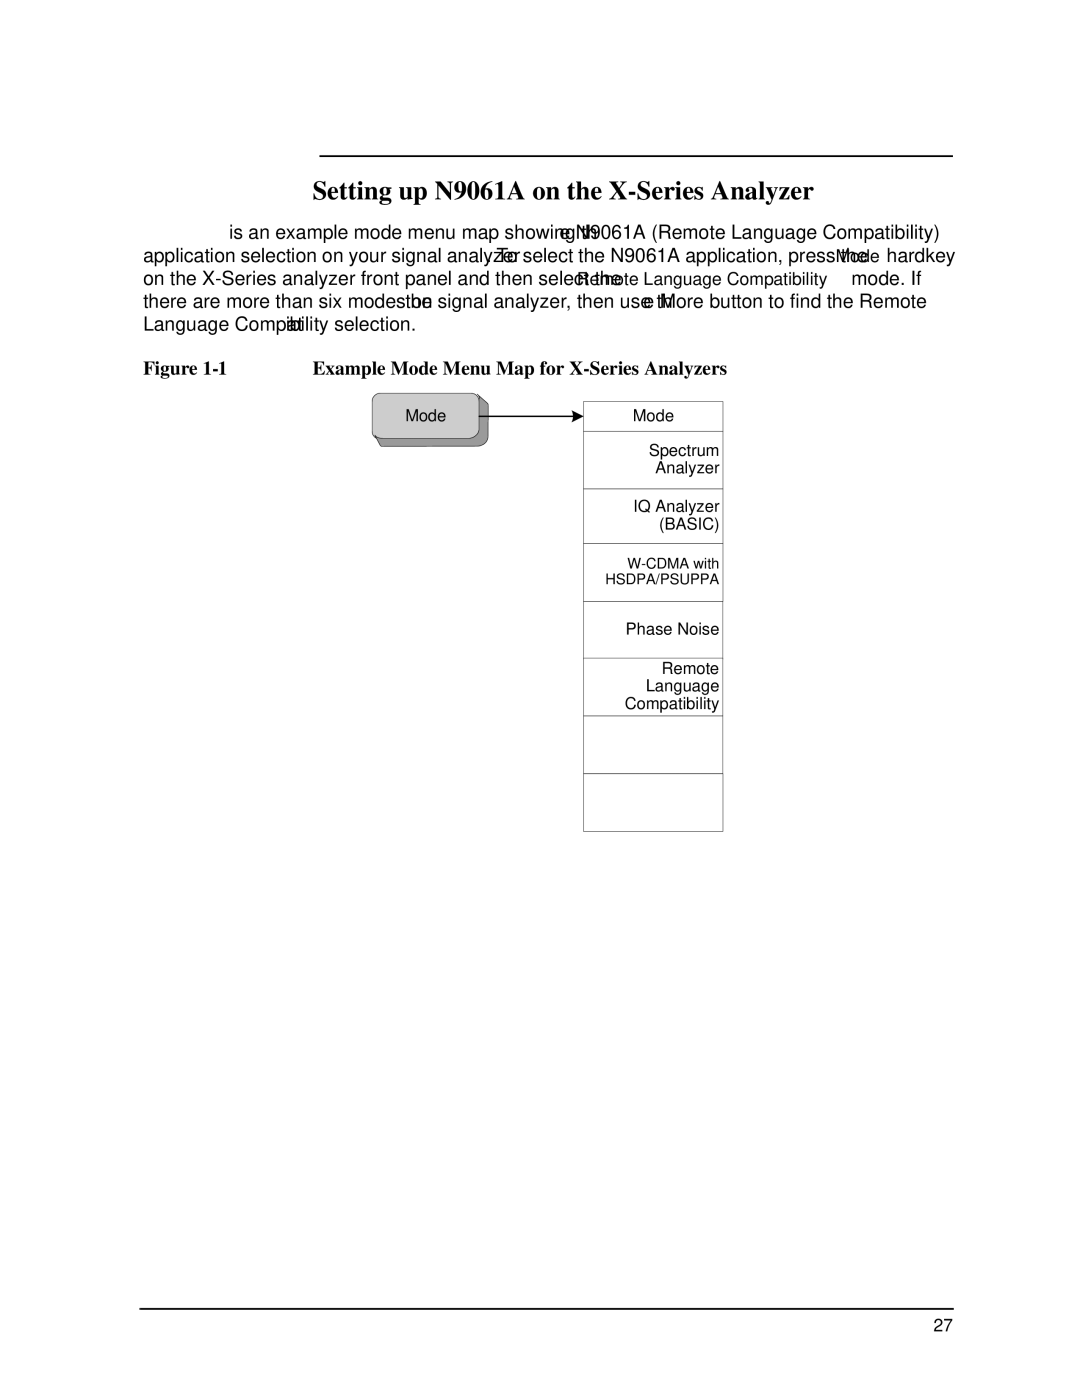 Agilent Technologies N9030a manual Setting up N9061A on the X-Series Analyzer, Example Mode Menu Map for X-Series Analyzers 